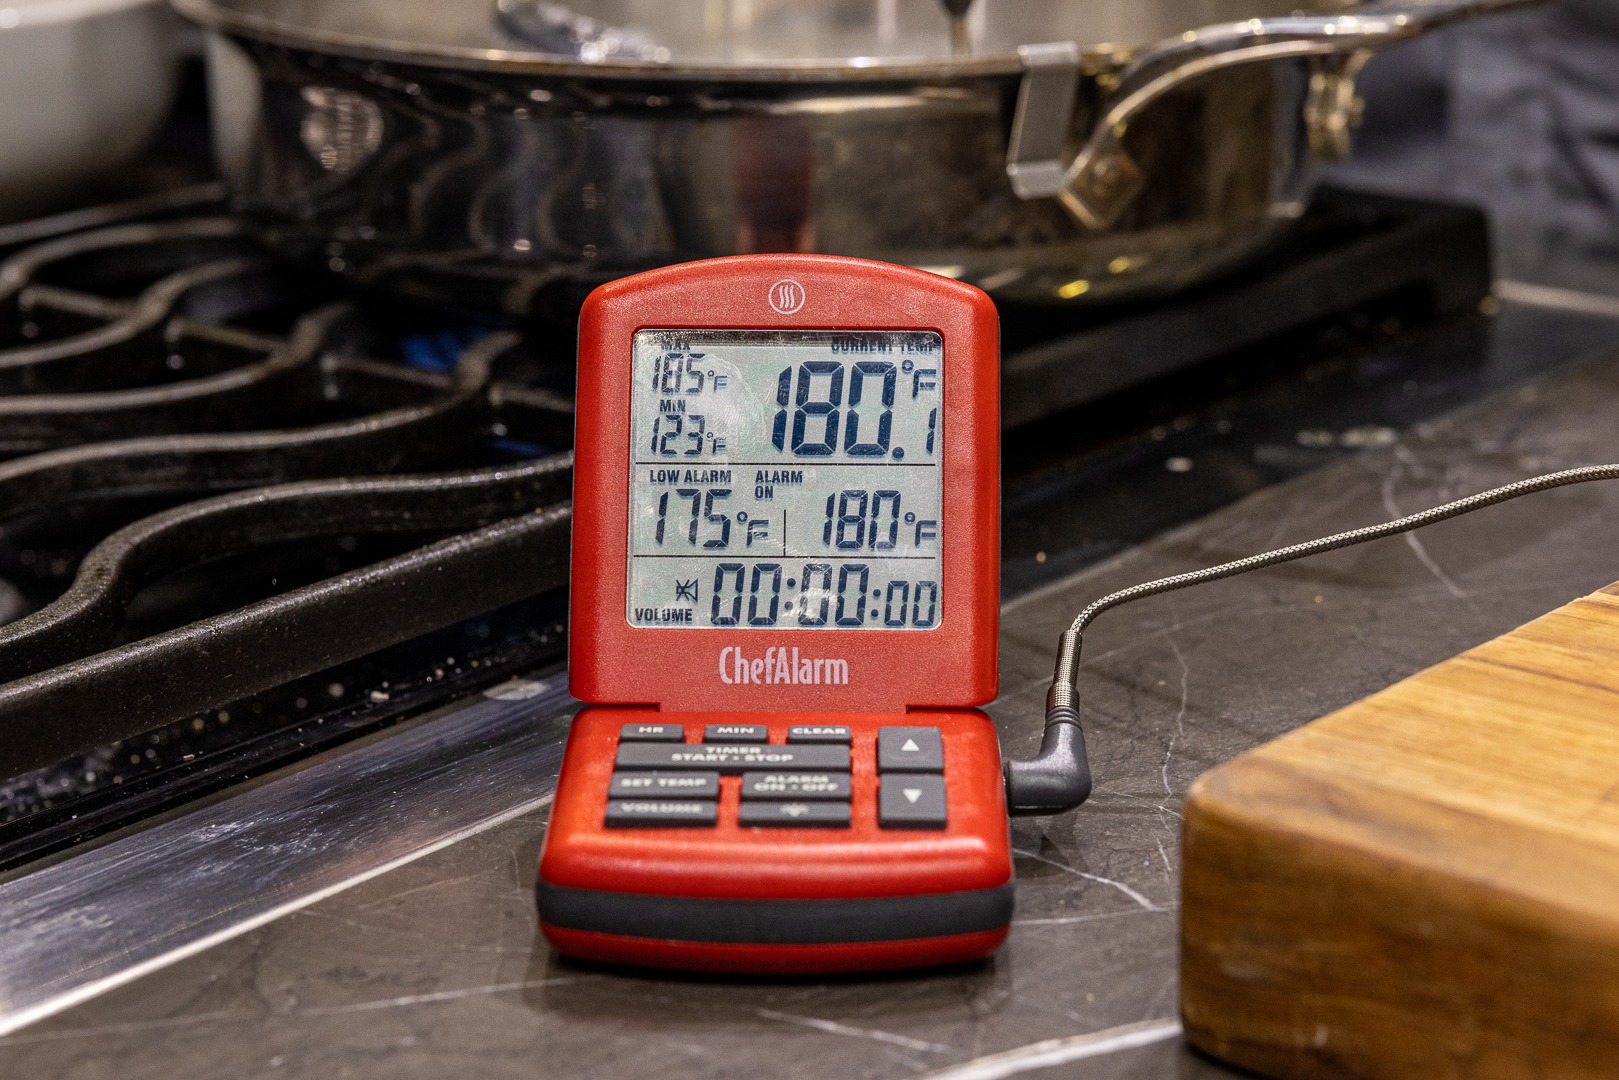 Water at temp for poaching eggs—180°F using Chef Alarm